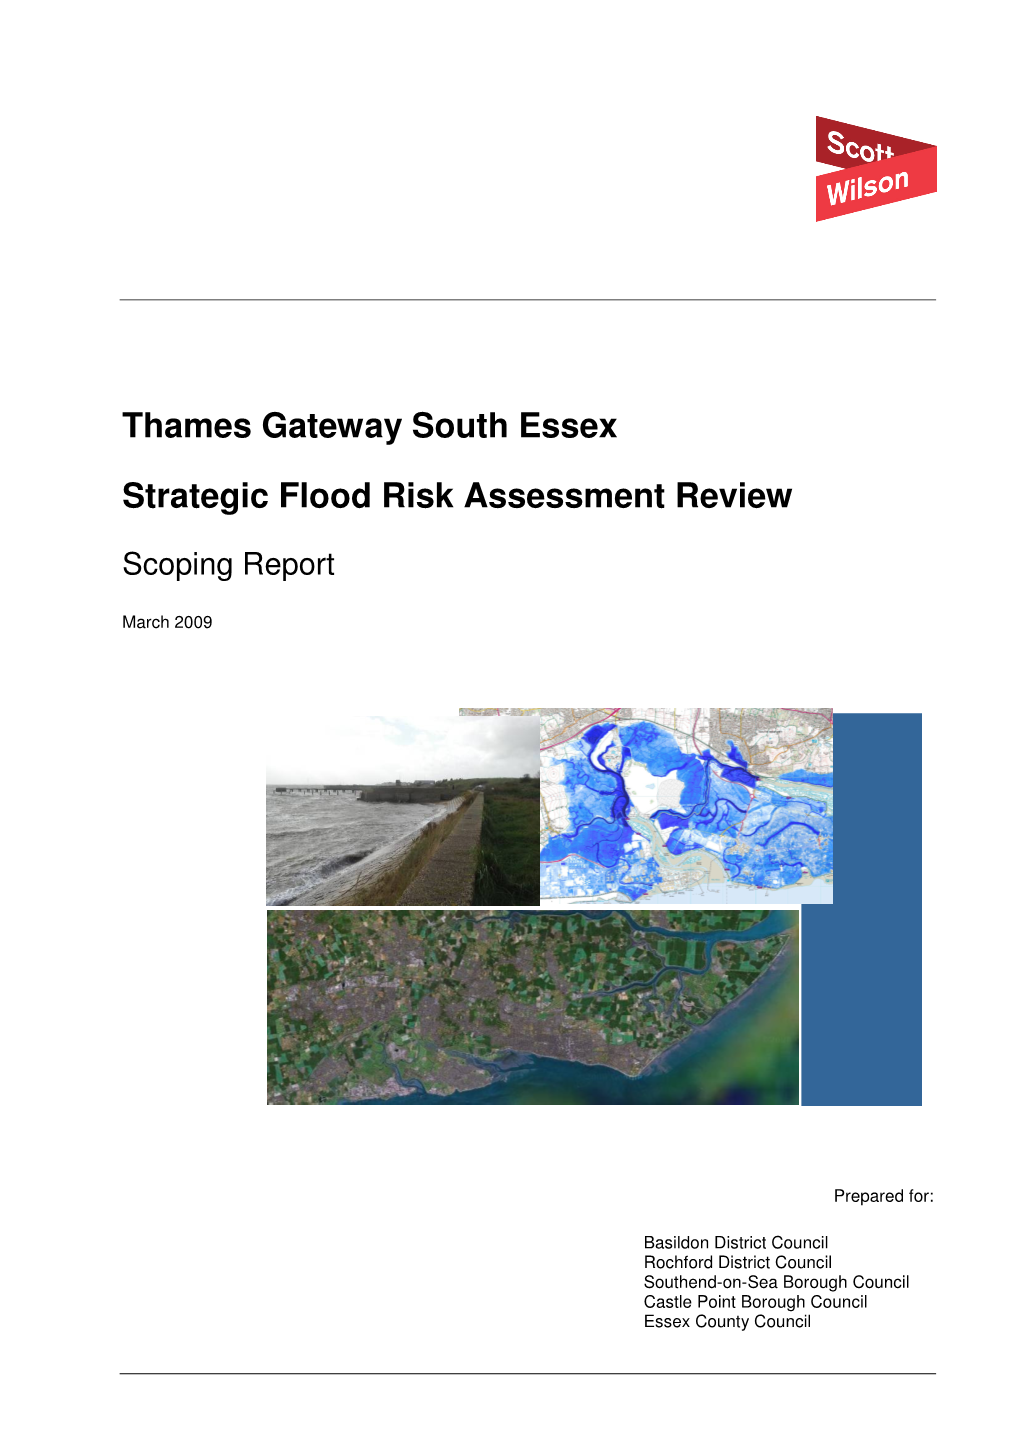 Thames Gateway South Essex Strategic Flood Risk Assessment (SFRA) Which Was Published in 2006